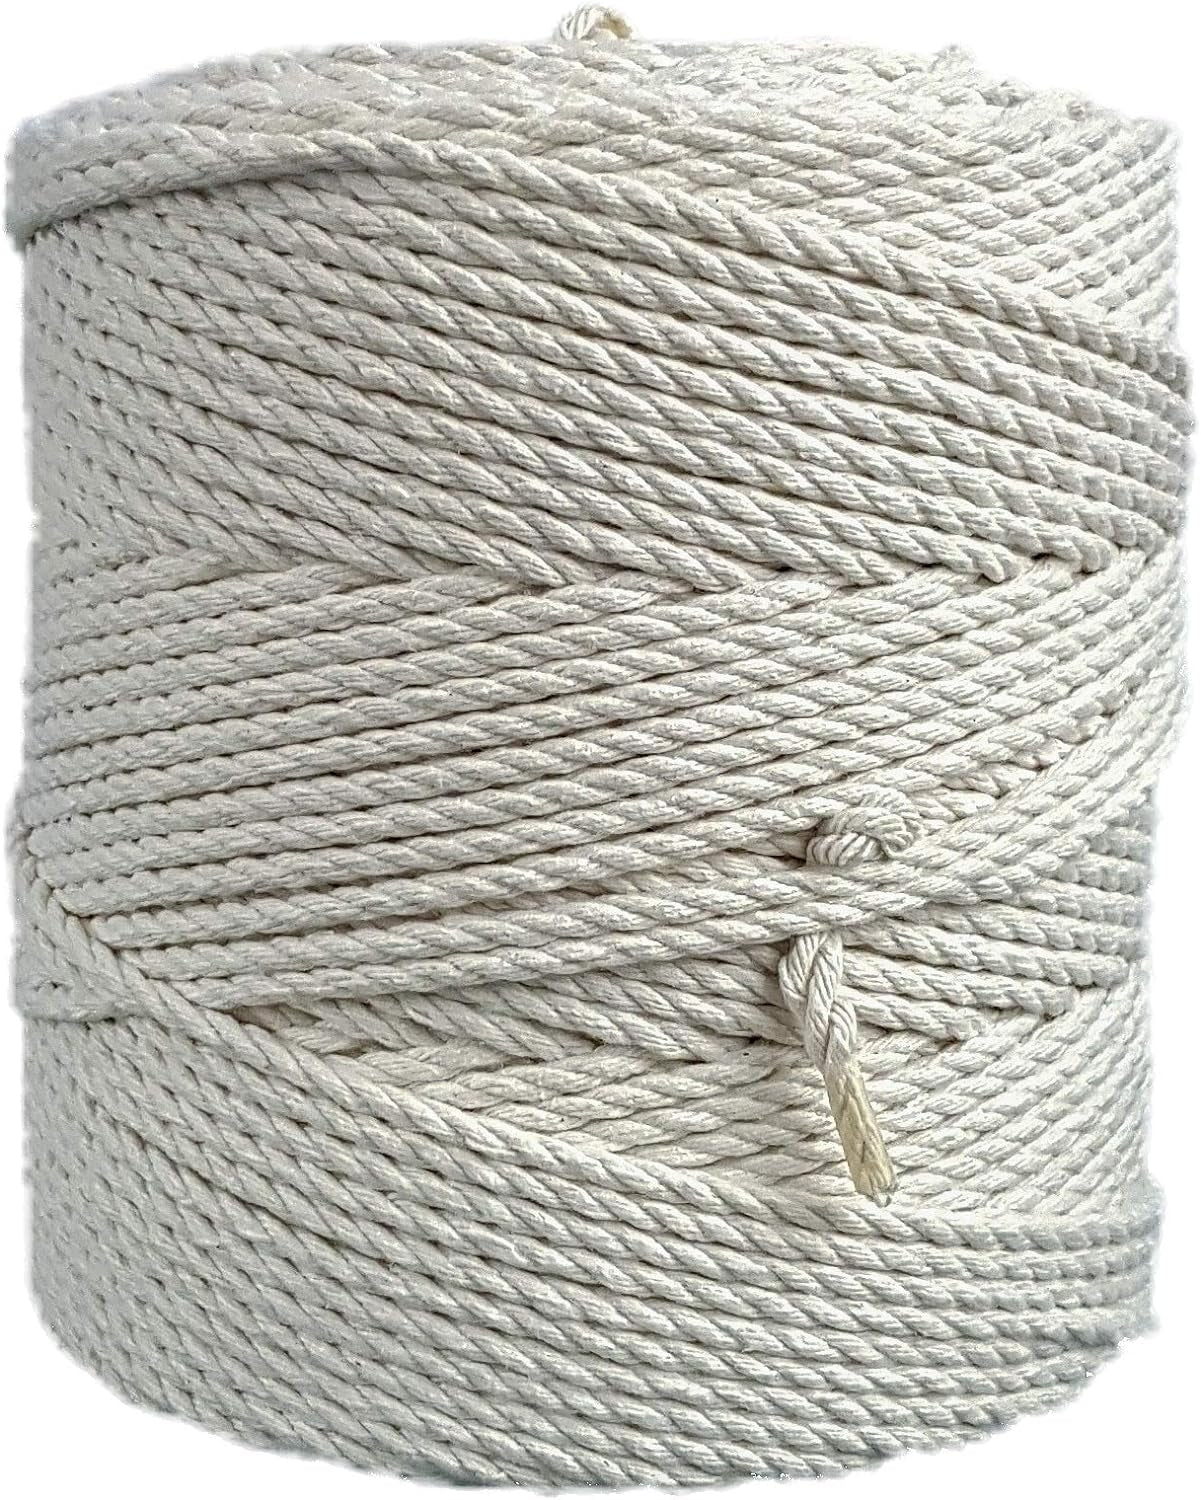 Macrame Cord 4 Mm * 284 Yd (853 Feet) - 3PLY Cotton Rope for Macrame Dream Catcher, Wall Hanging, Plant Hanger, Gift Wrapping and Wedding Decorations